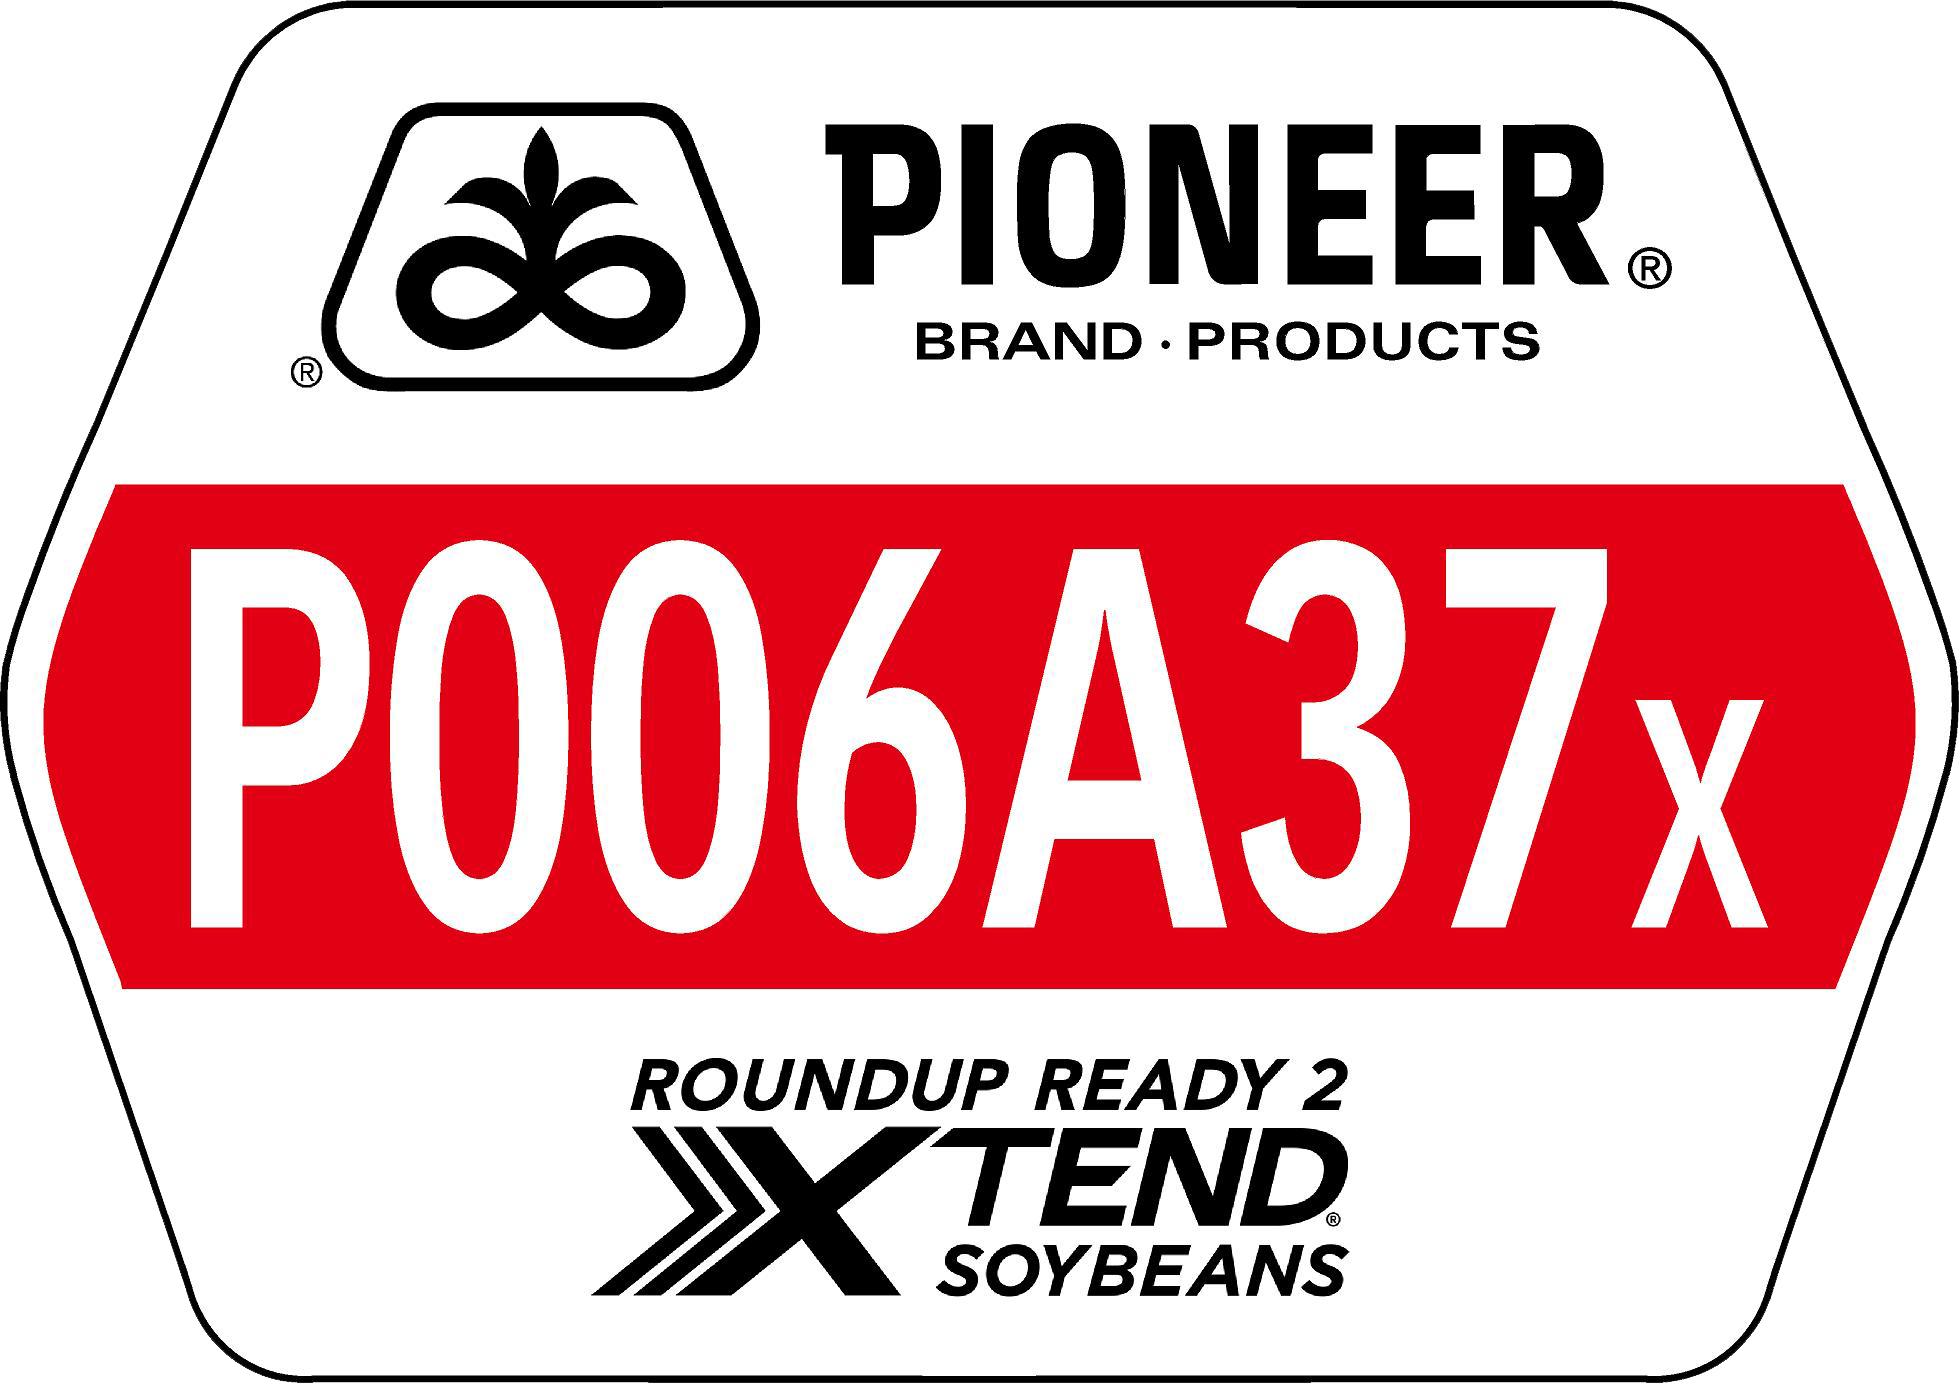 Field Sign > Soybeans > P006A37X